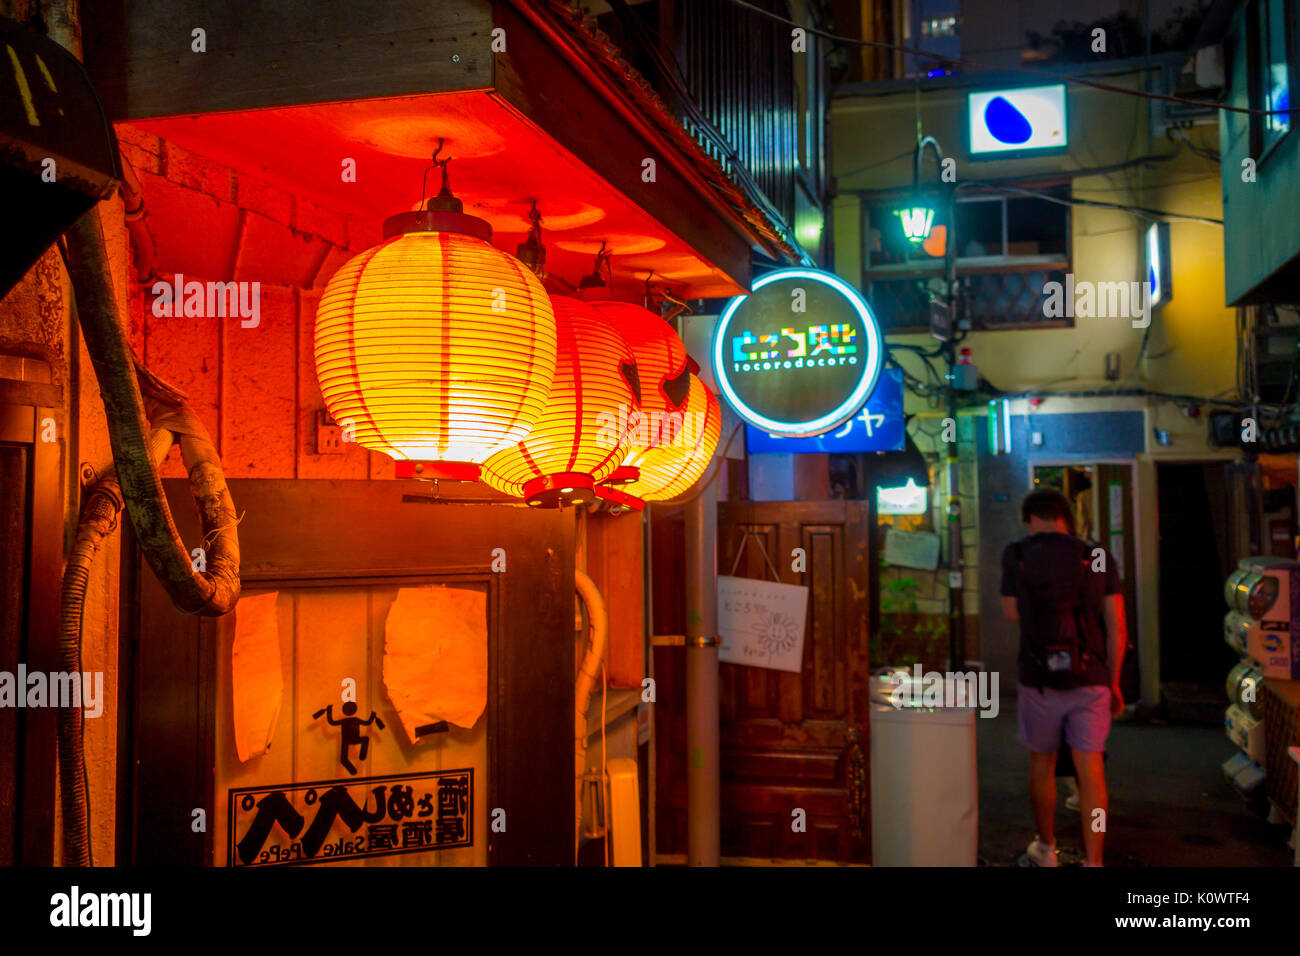 TOKYO, JAPAN JUNE 28 - 2017: Red lanterns with Japanesse letters at night in traditional back street bars in Shinjuku Golden Gai. Golden gai consists of 6 tiny alleys with 200 tiny bars and 20th century atmosphere, located in Tokyo Stock Photo